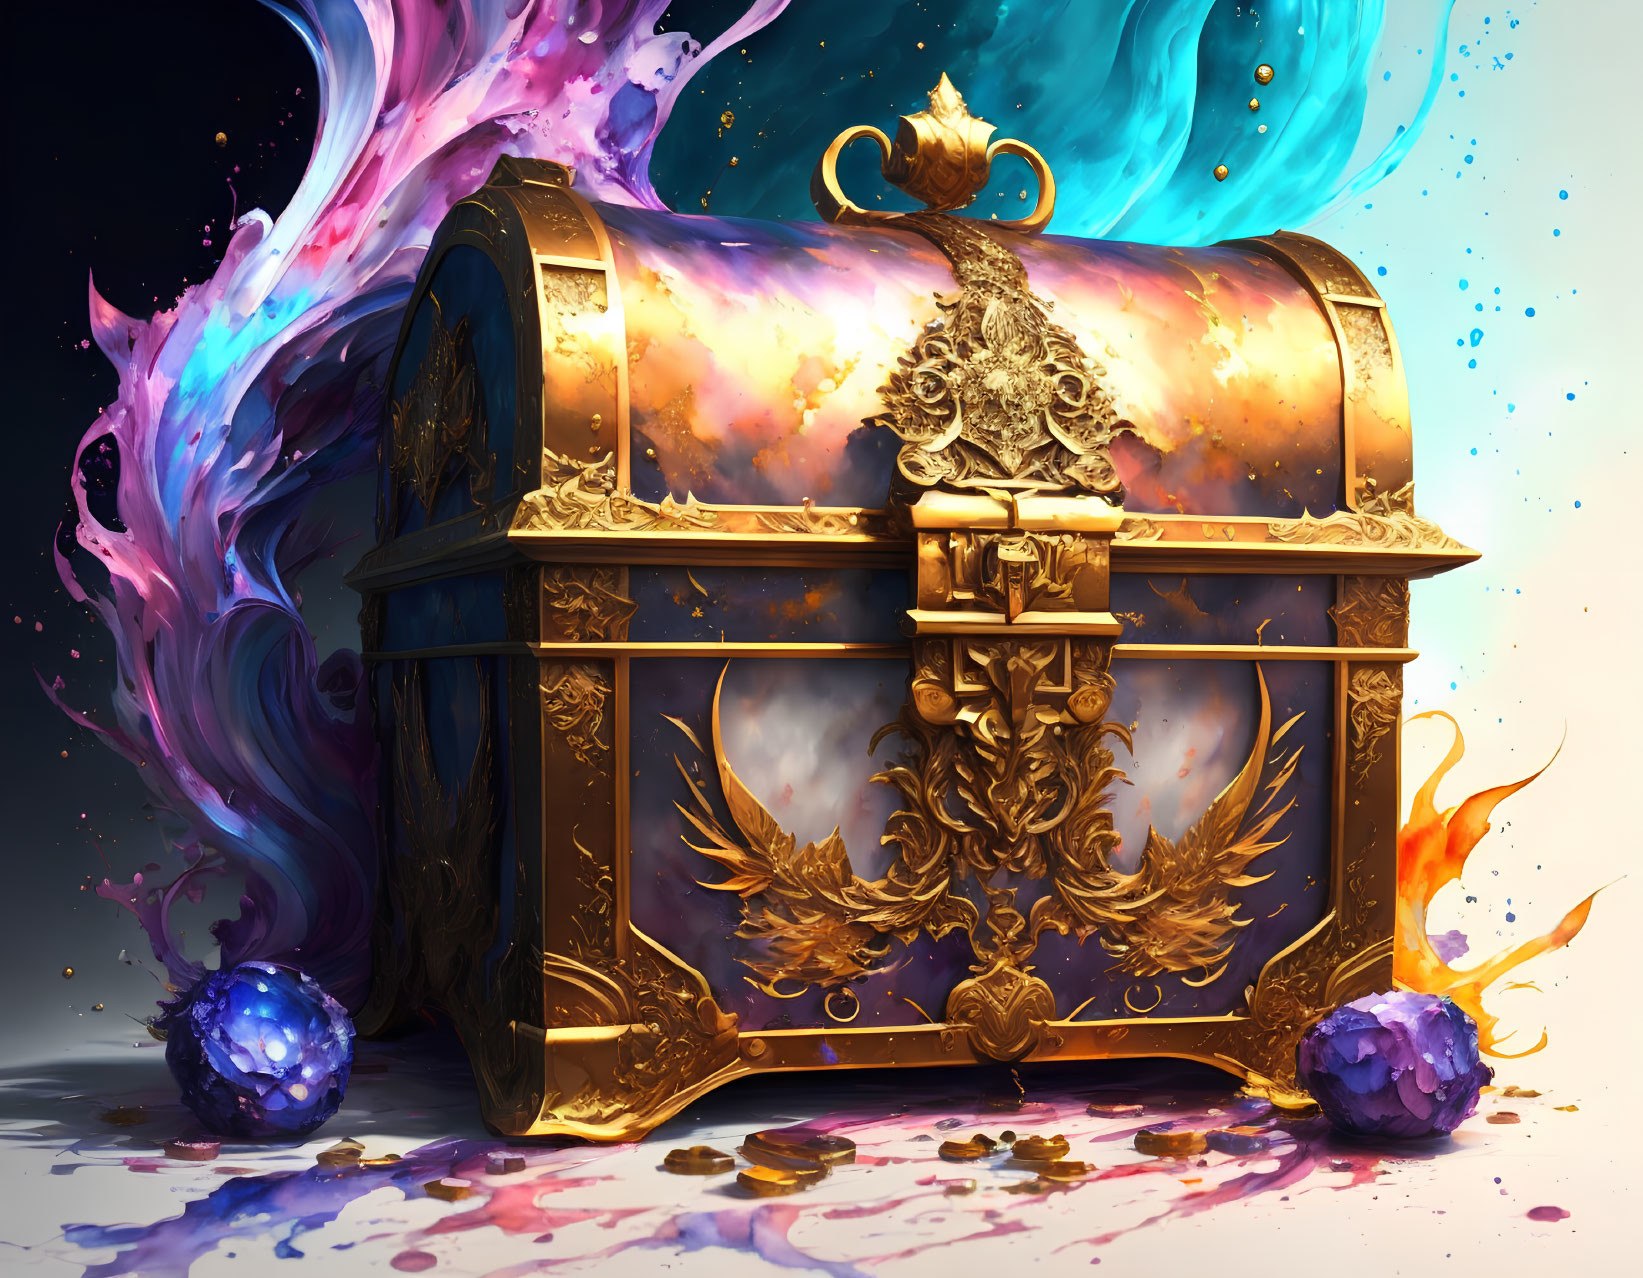 Golden treasure chest in mystical nebula aura with glowing orbs